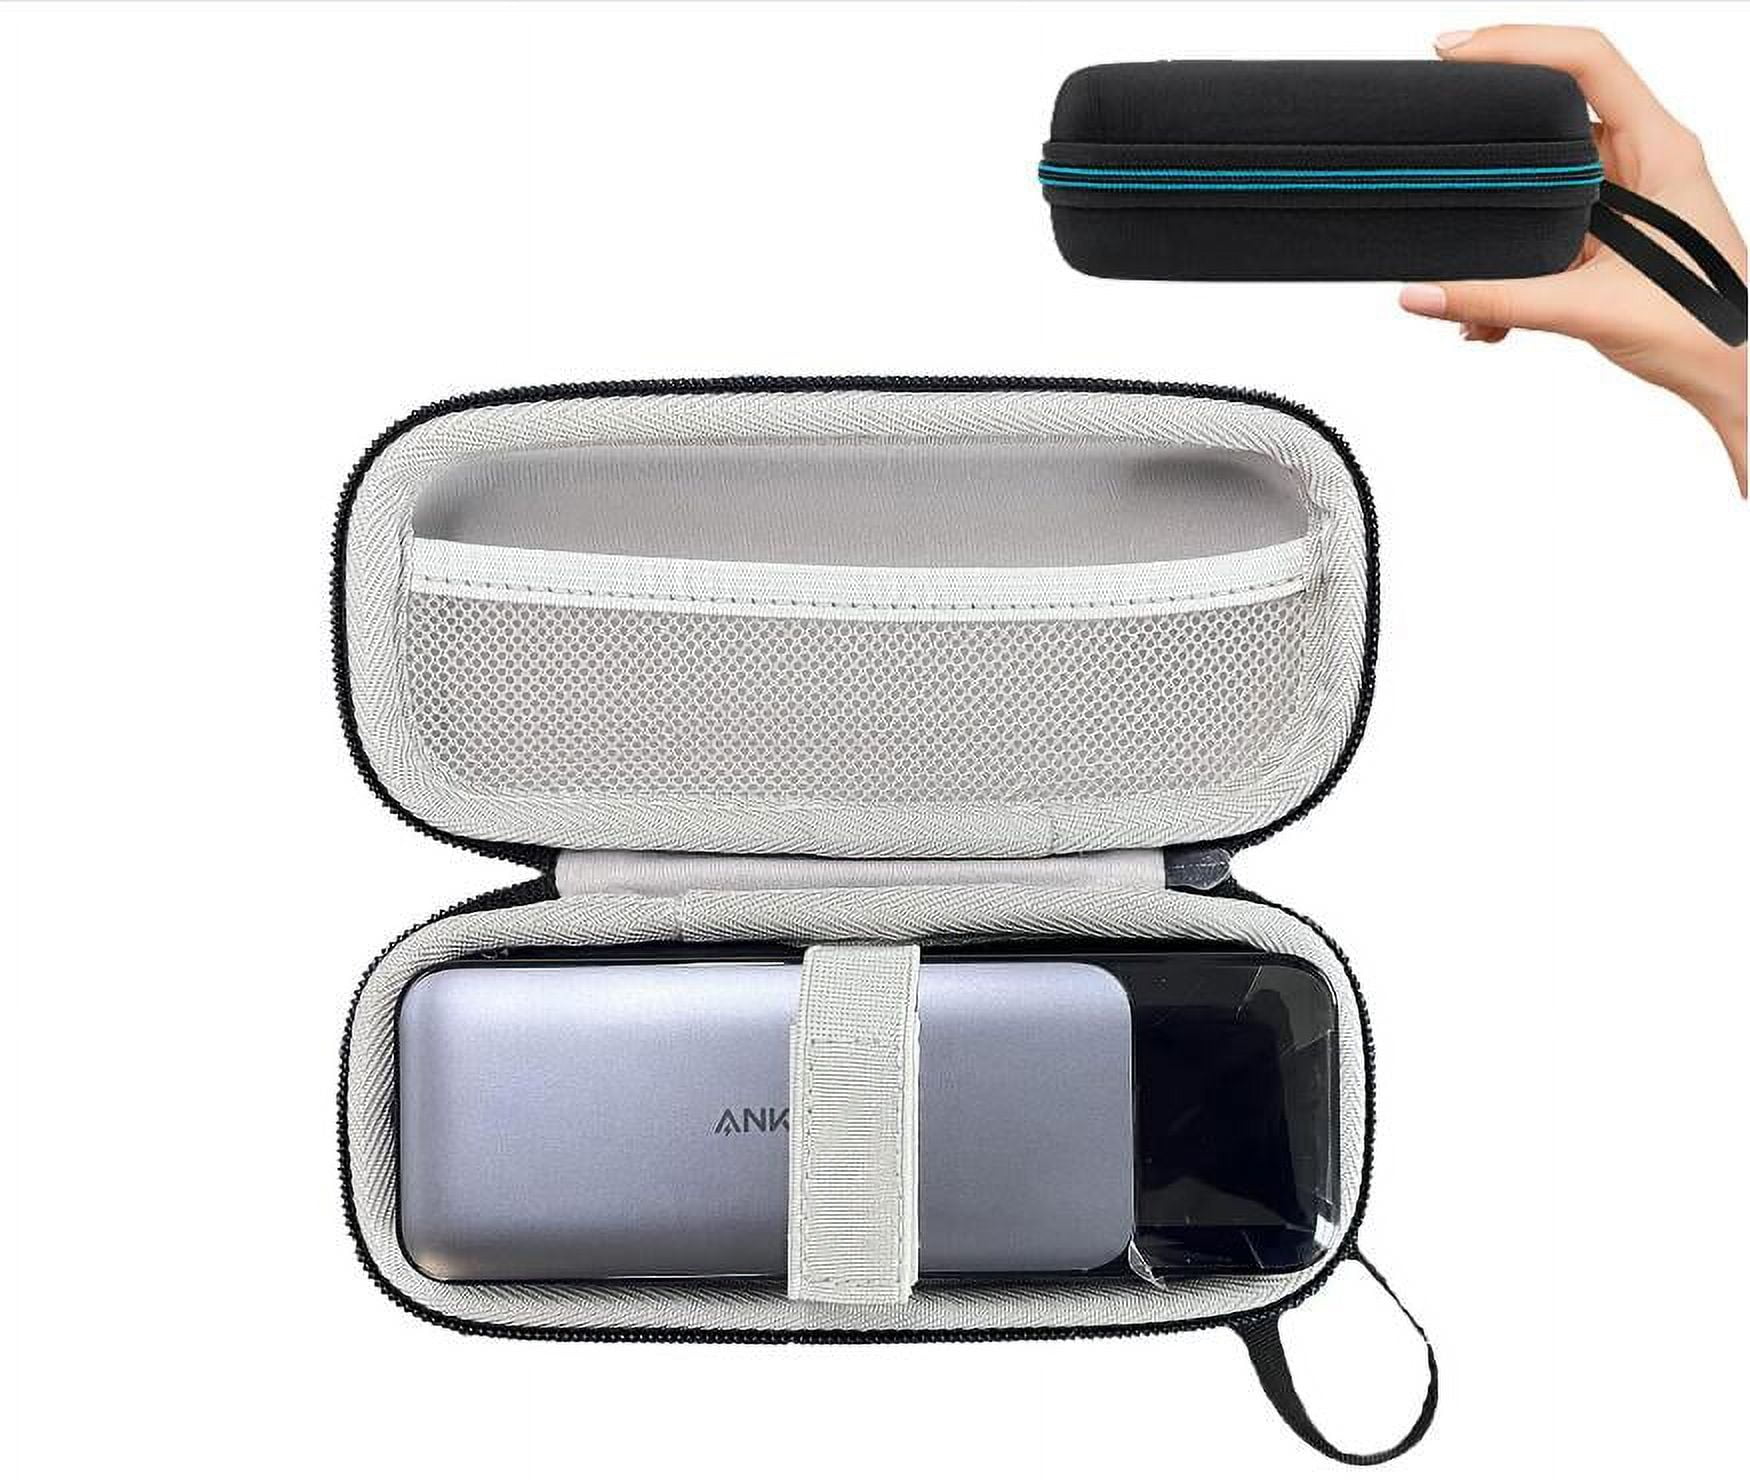  Hounyoln Hard Travel Case for Anker 737 Power Bank,Compatible  with Anker Power Bank 737 (PowerCore 24K)&Accessories EVA Water Proof  Portable Storage Bag : Electronics